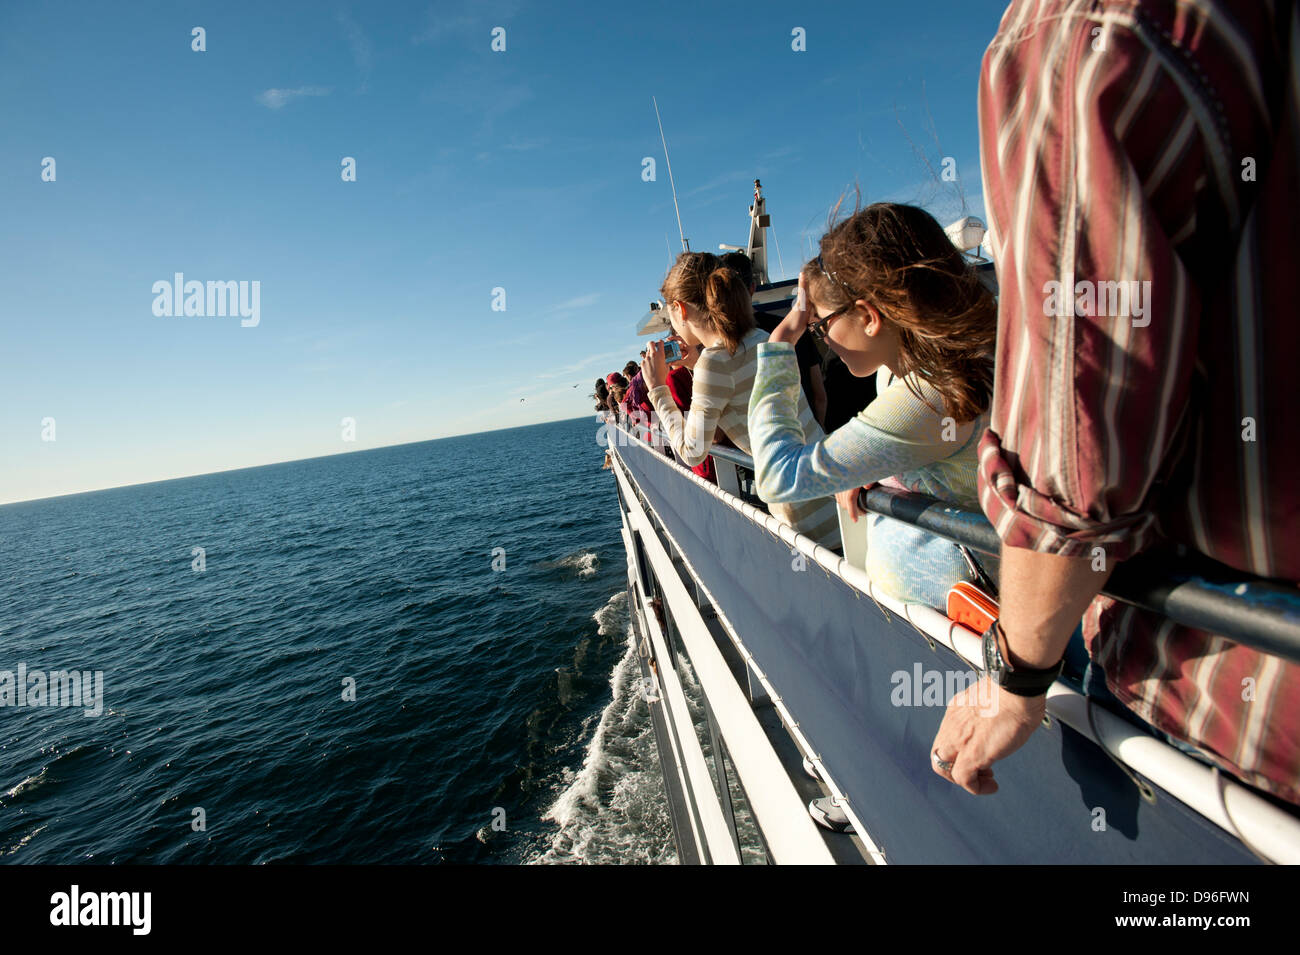 Whale watching in the Pacific near San Diego, California, United States of America Stock Photo